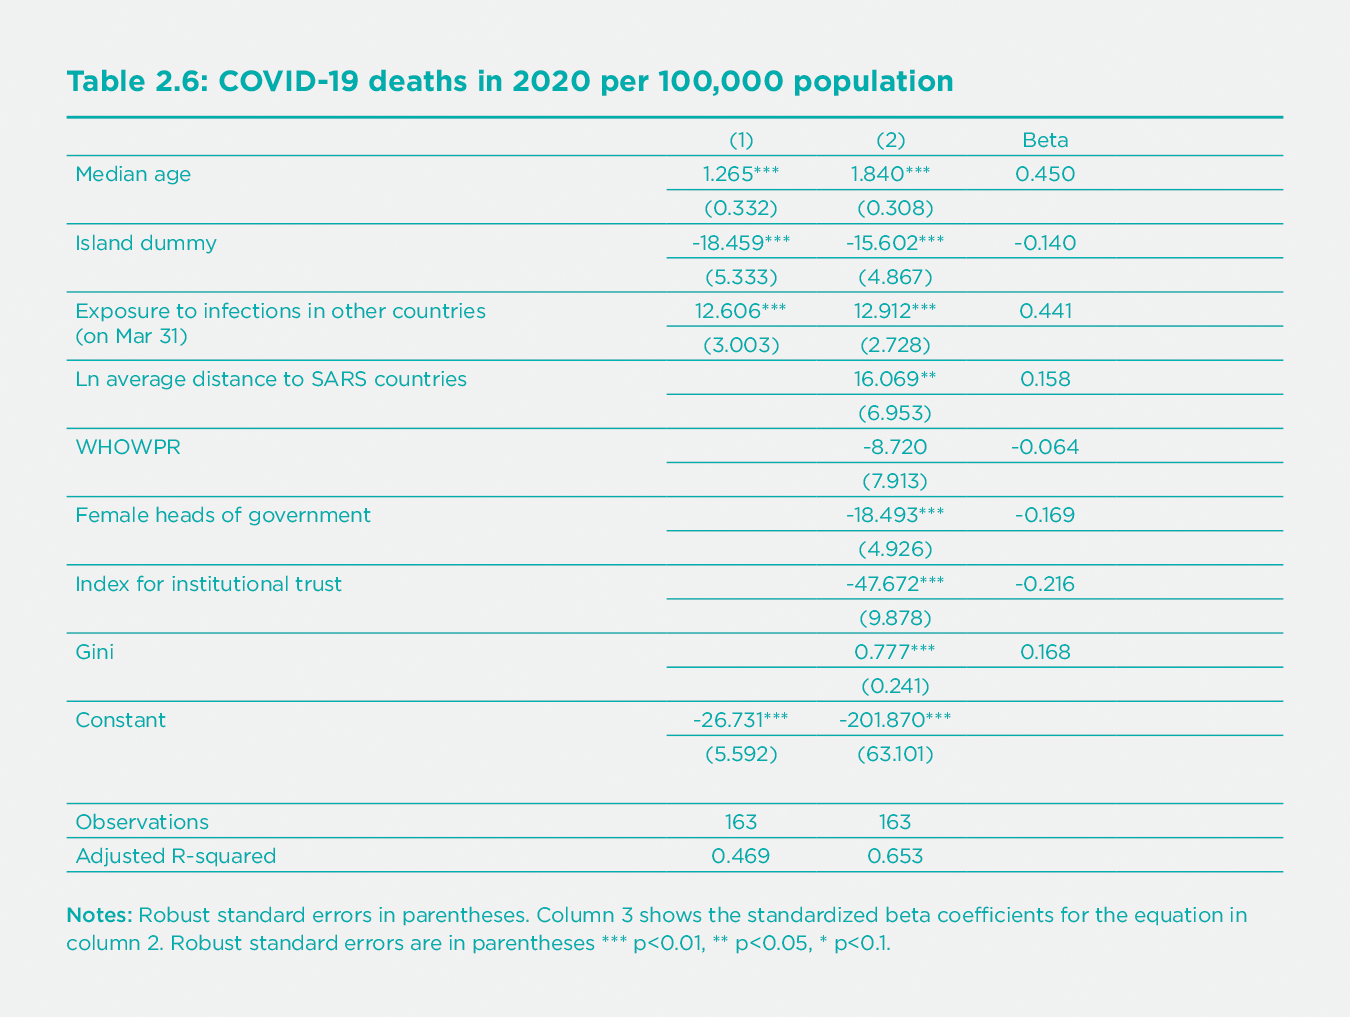 Table 2.6 COVID-19 deaths in 2020 per 100,000 population 